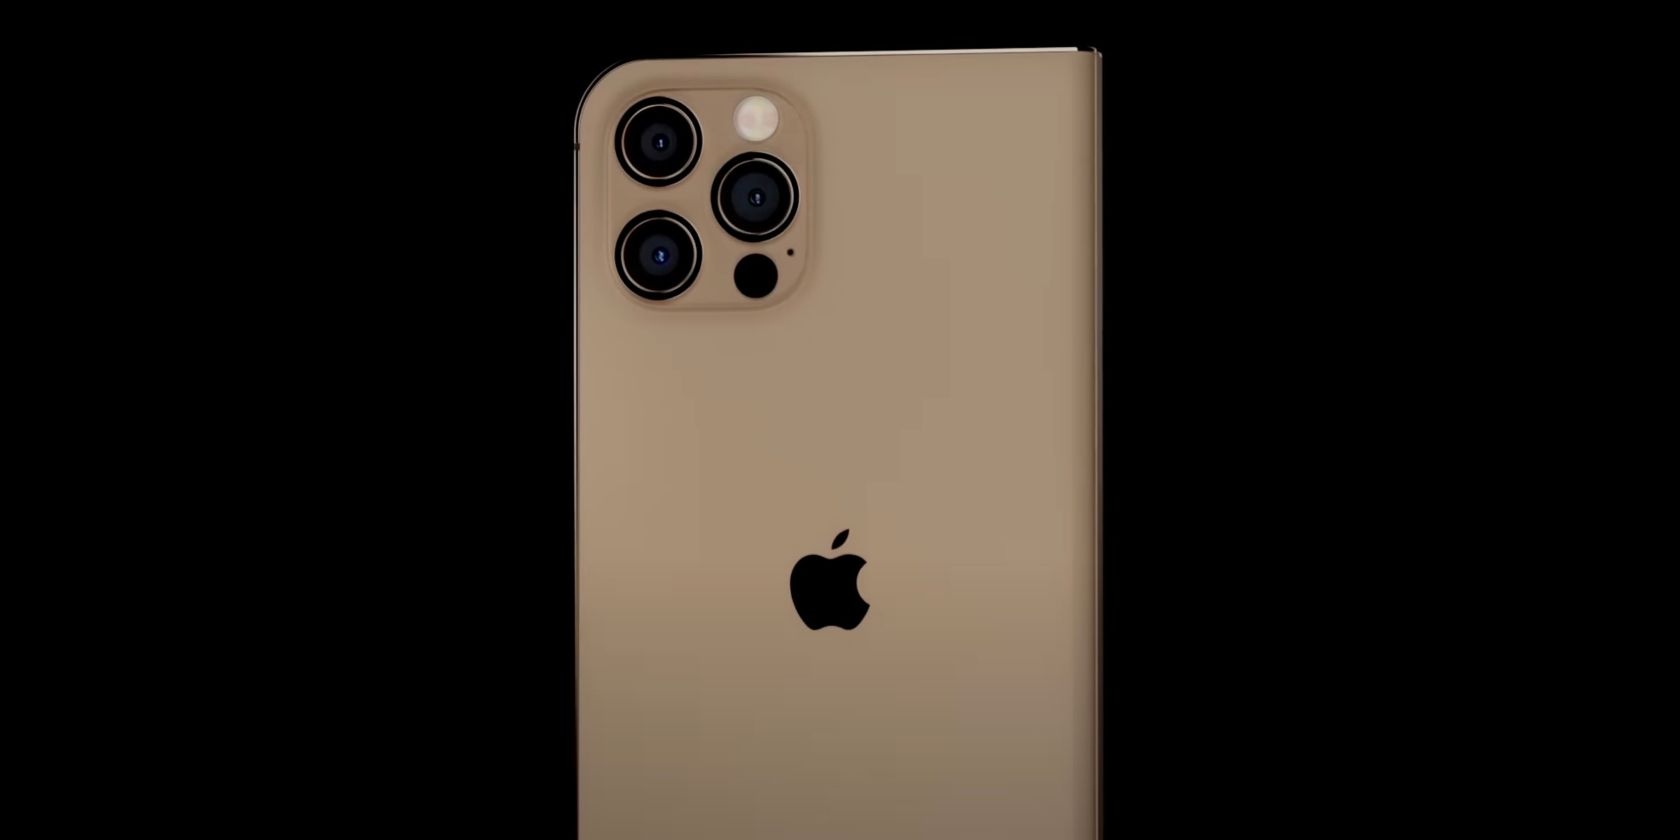 iPhone Fold phone with rose gold exterior and three cameras